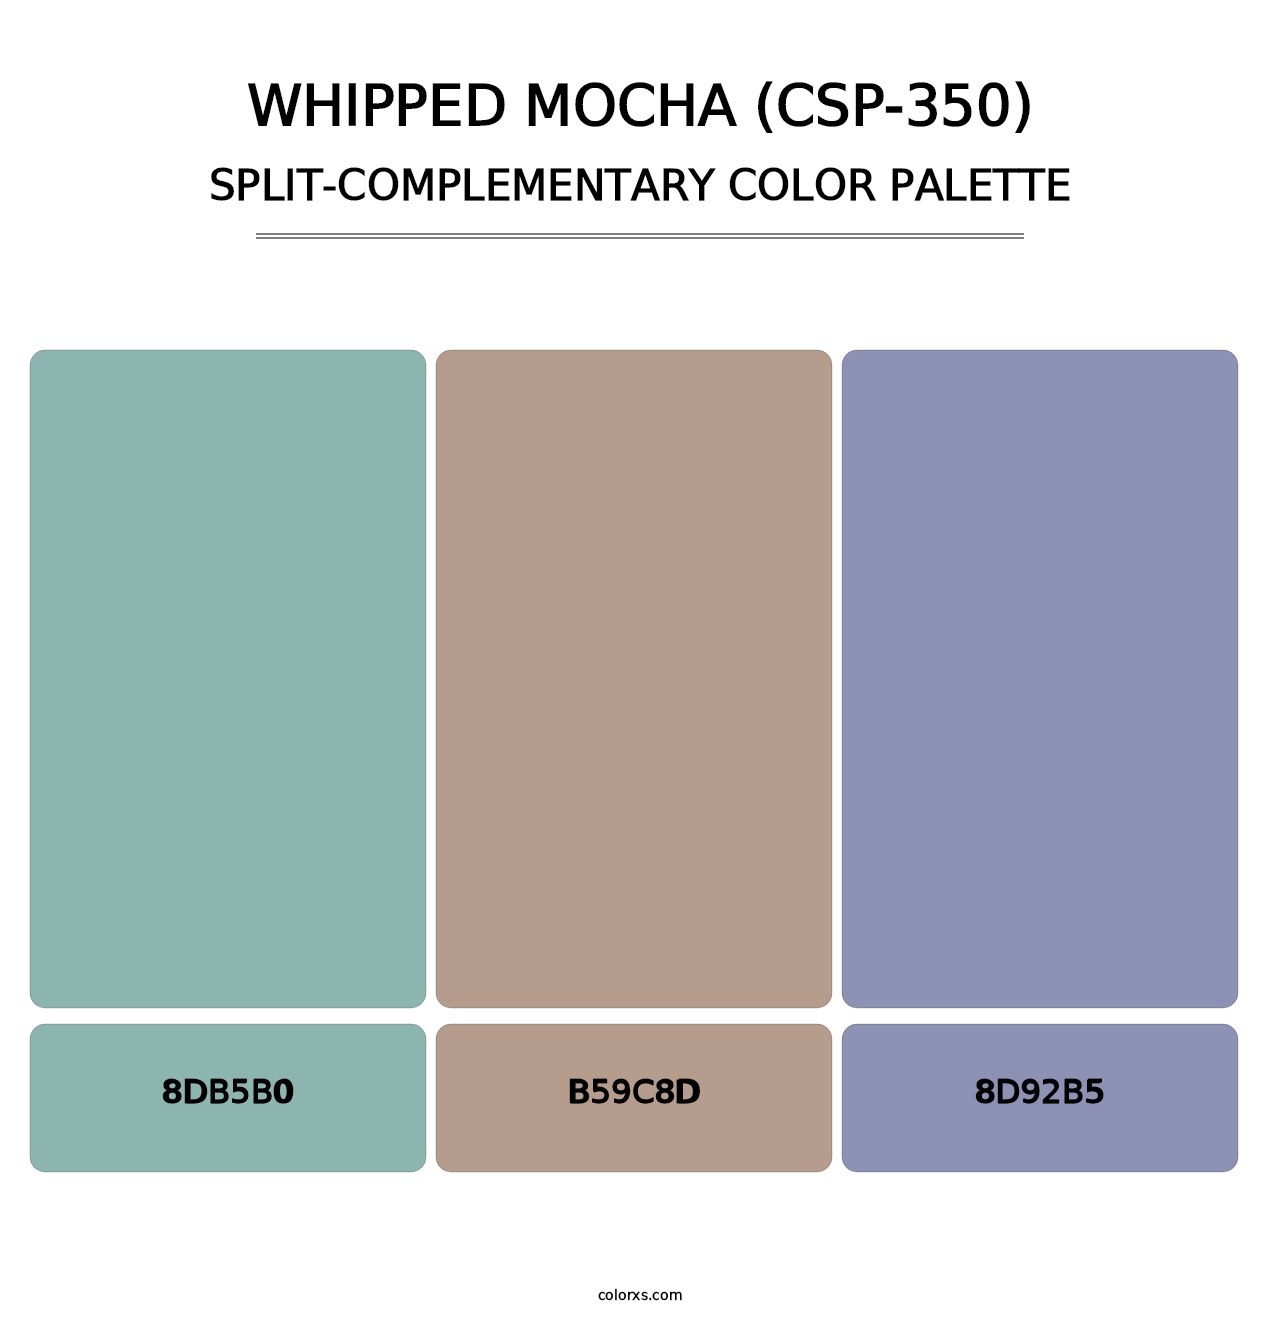 Whipped Mocha (CSP-350) - Split-Complementary Color Palette